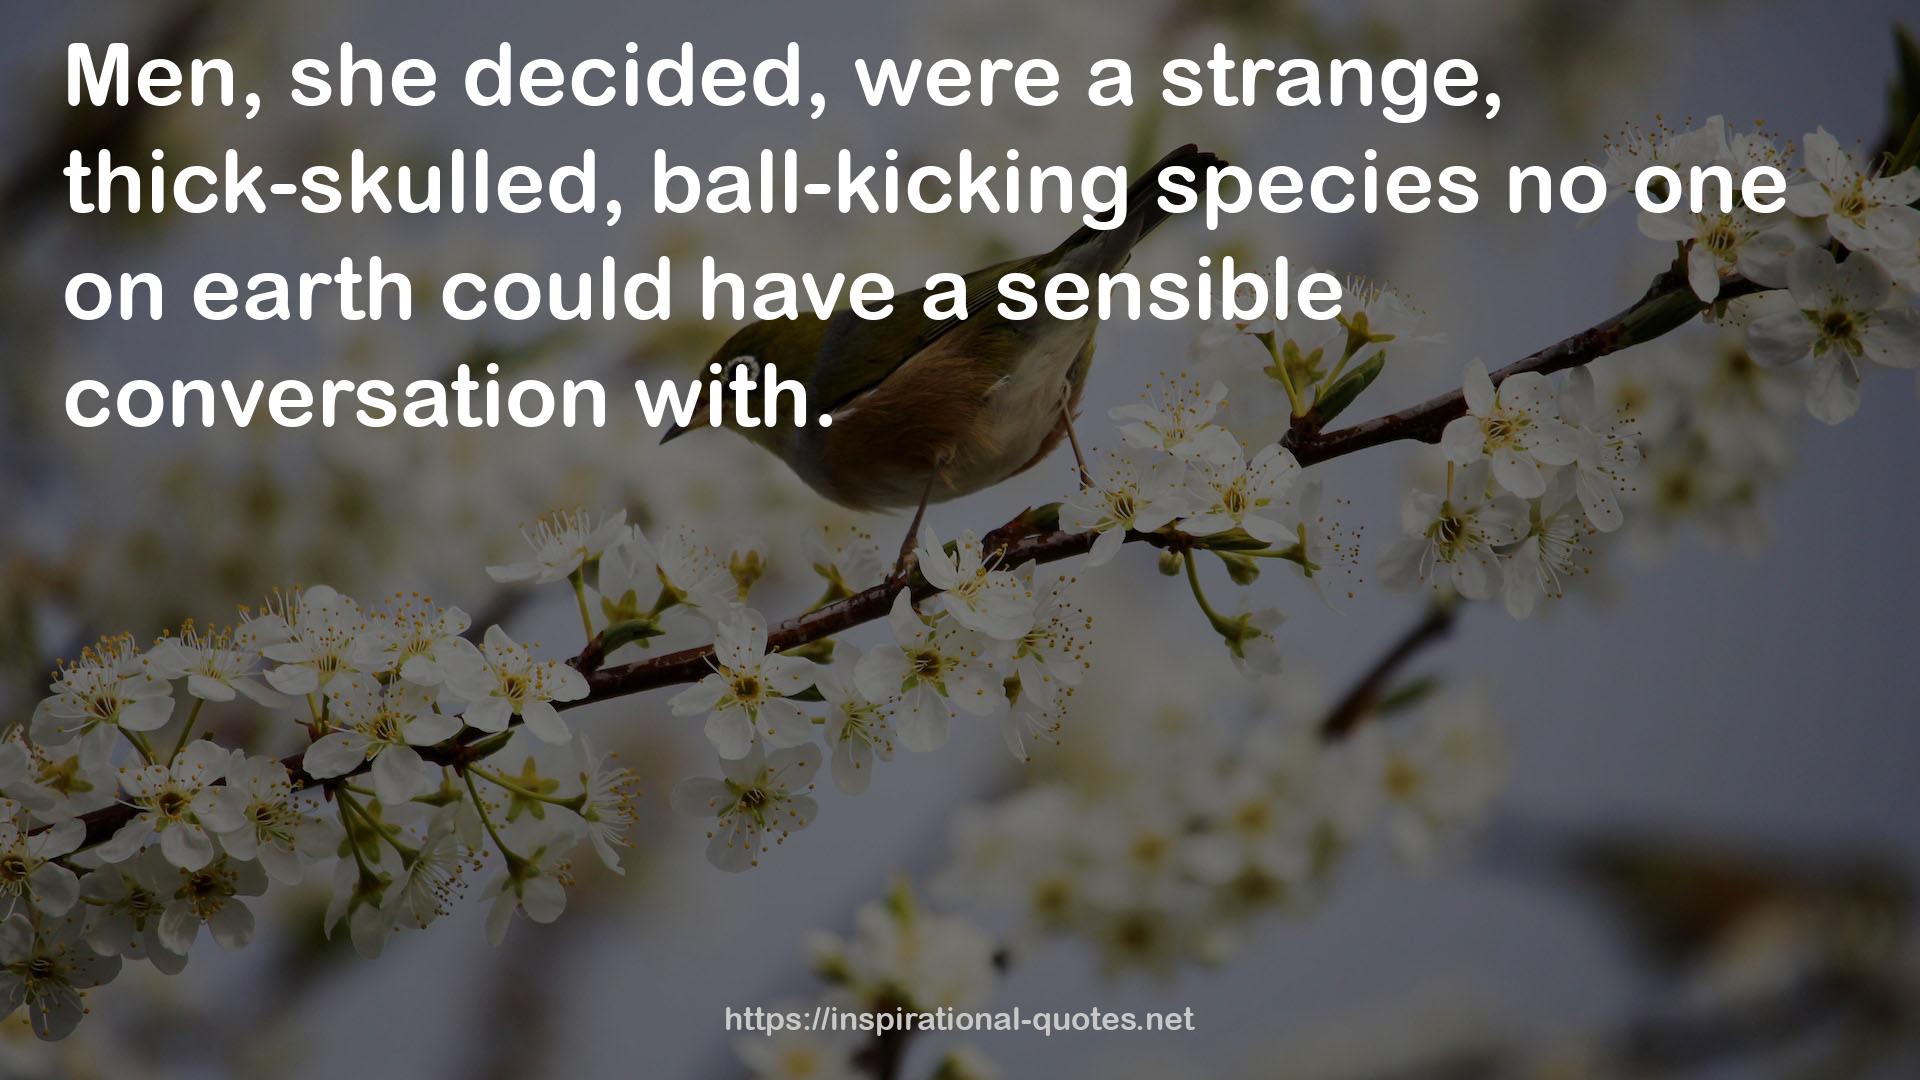 a strange, thick-skulled, ball-kicking species  QUOTES